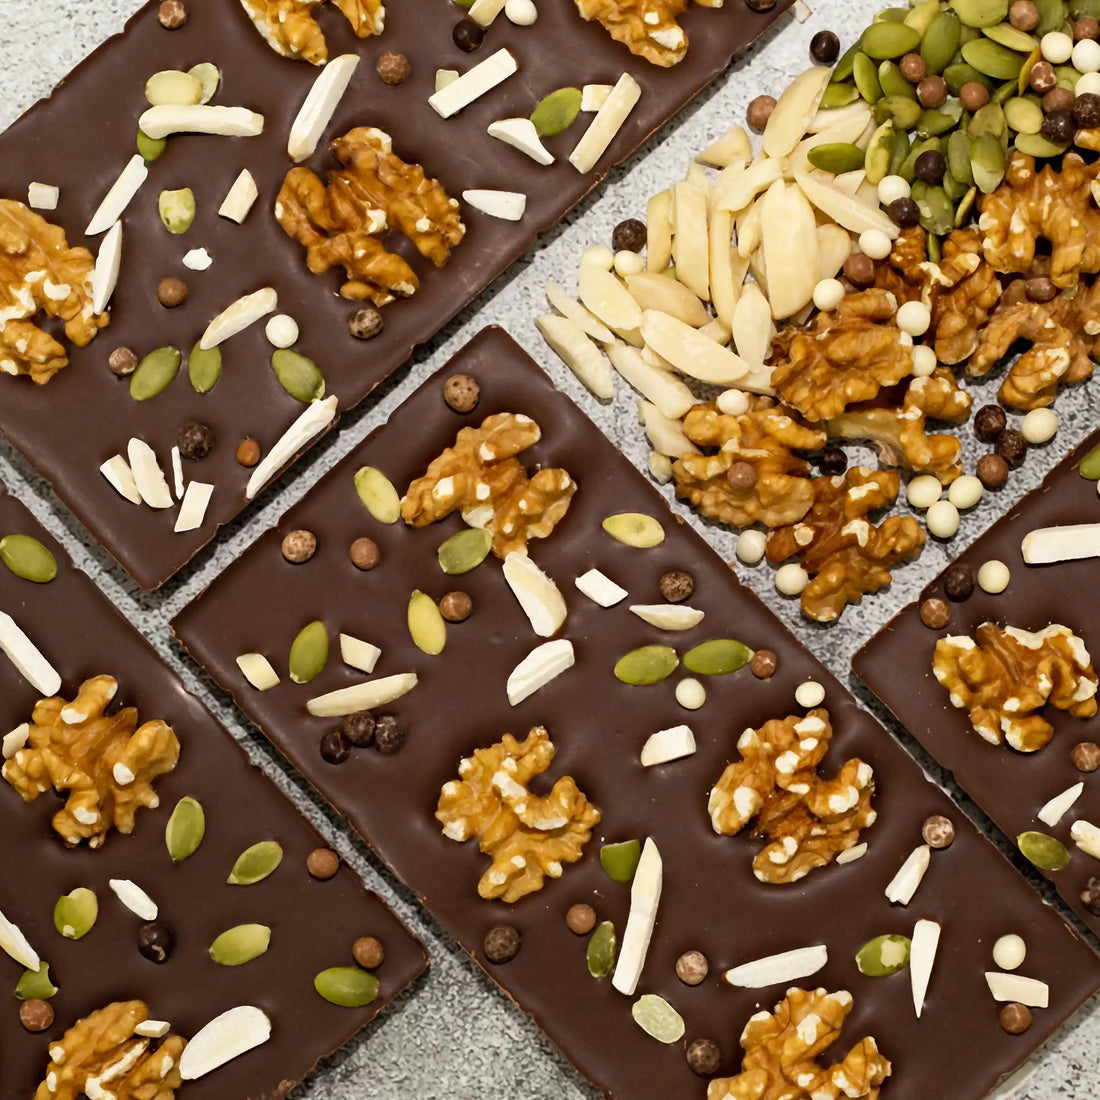 Symphony - Milk Chocolate Bar showing front hexagon pattern and back with walnuts, pumpkin seeds, and almonds